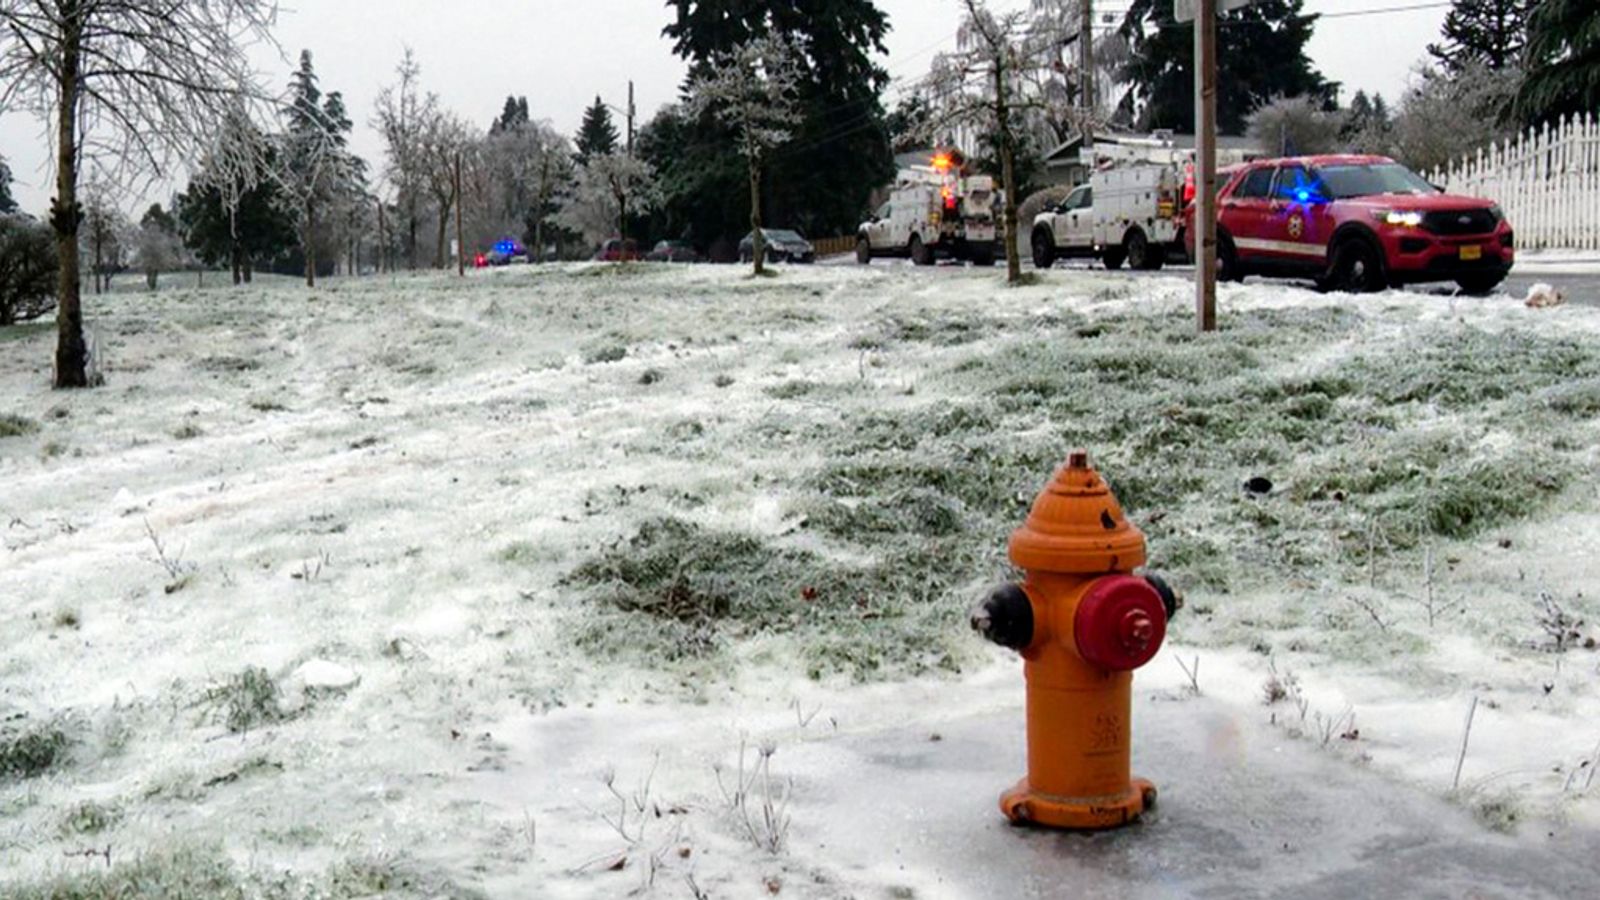 Three die from electrocution after live power line falls on car in Oregon ice storm